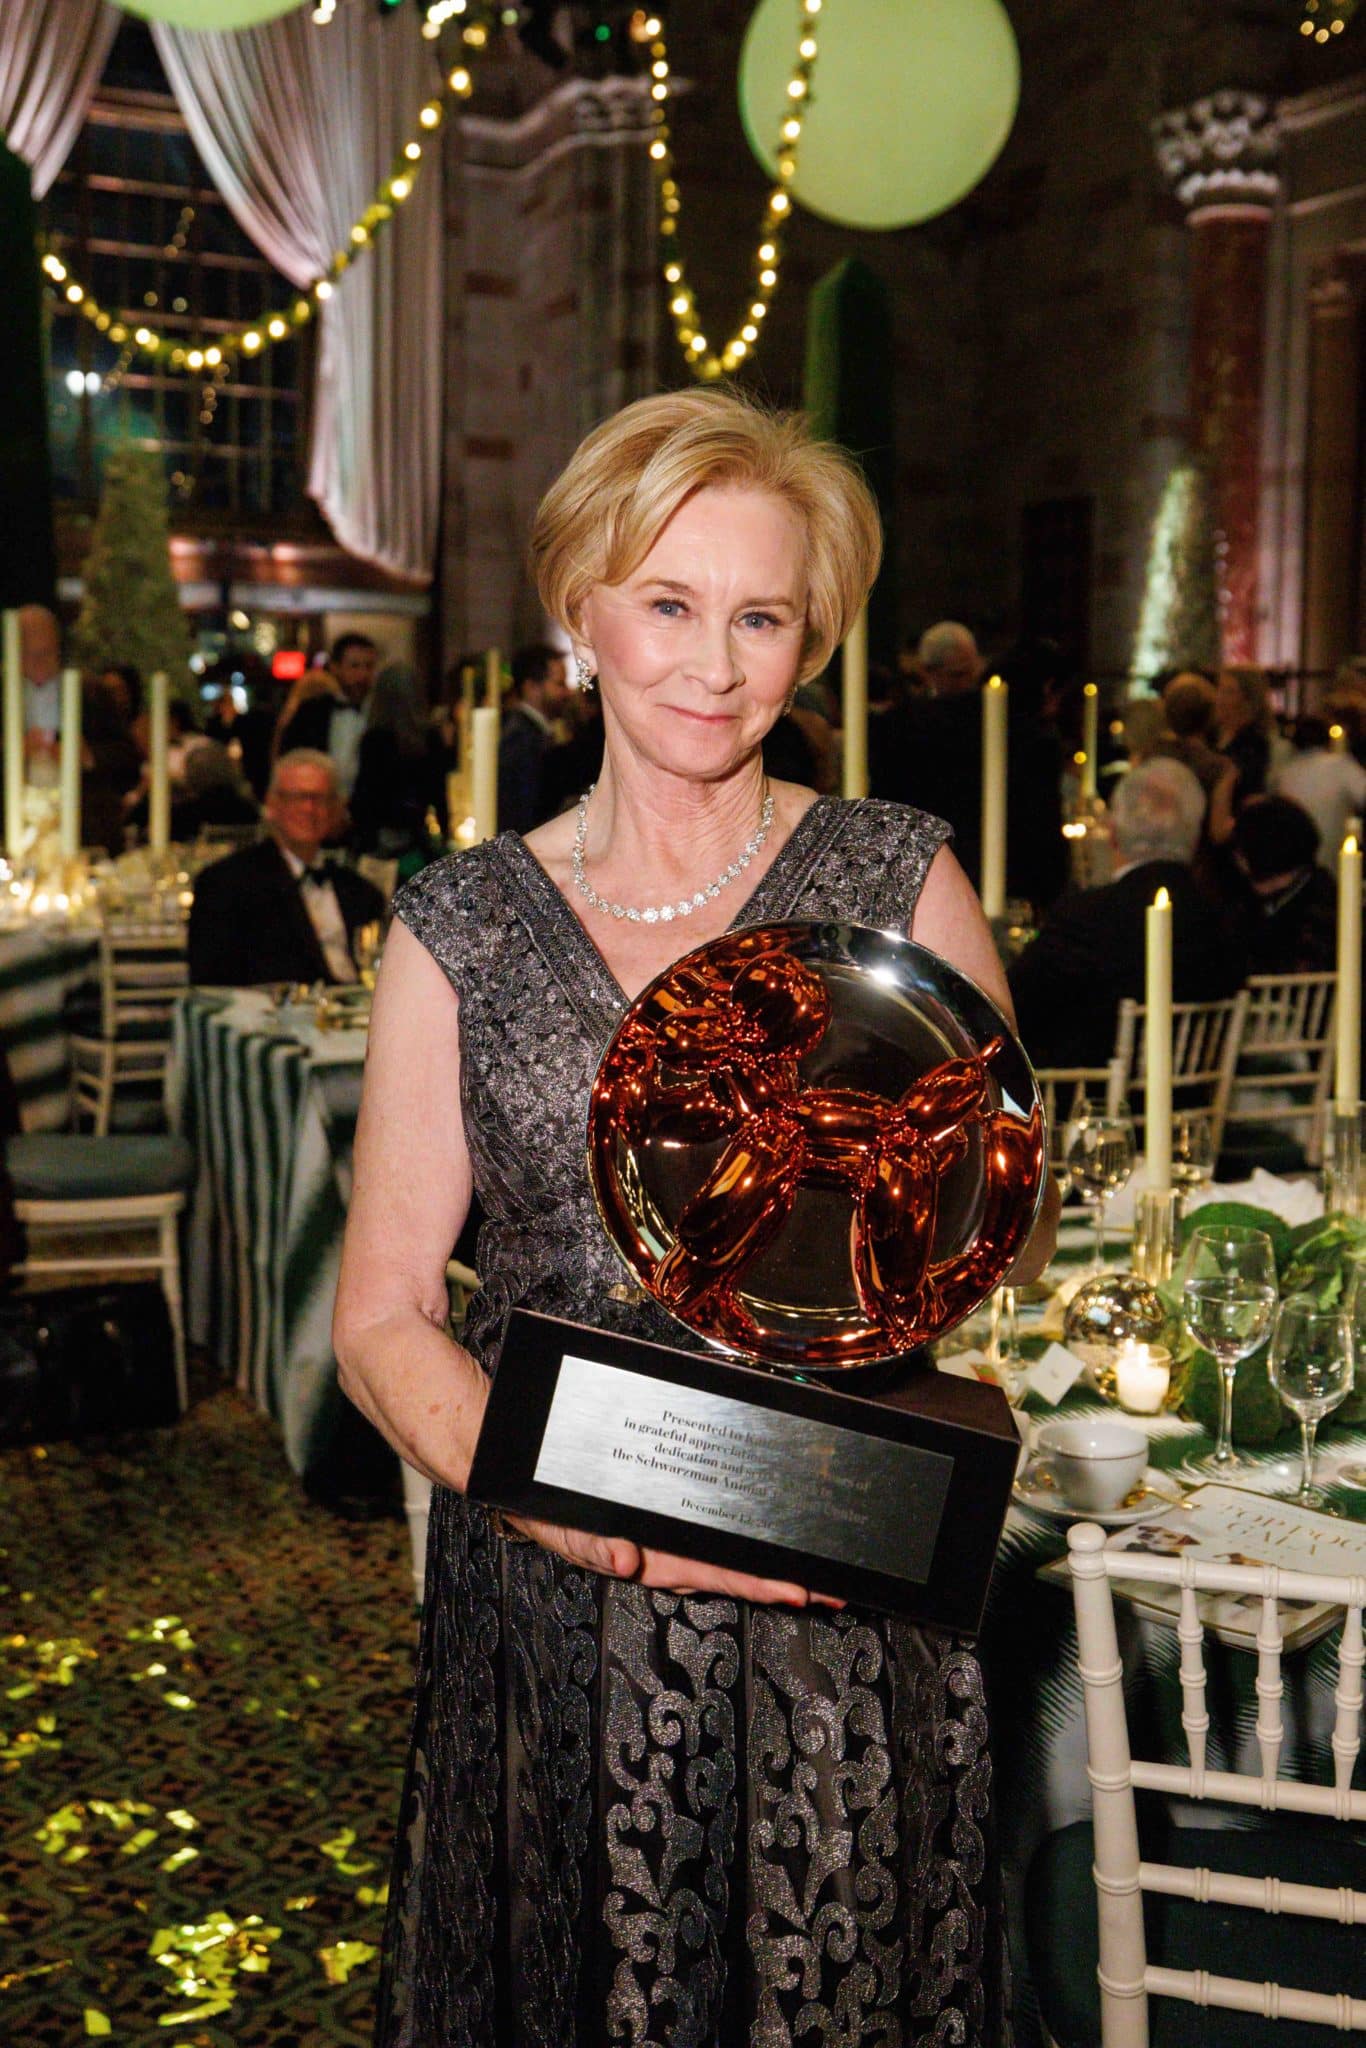 Kathryn Coyne with her award at AMC's Top Dog Gala